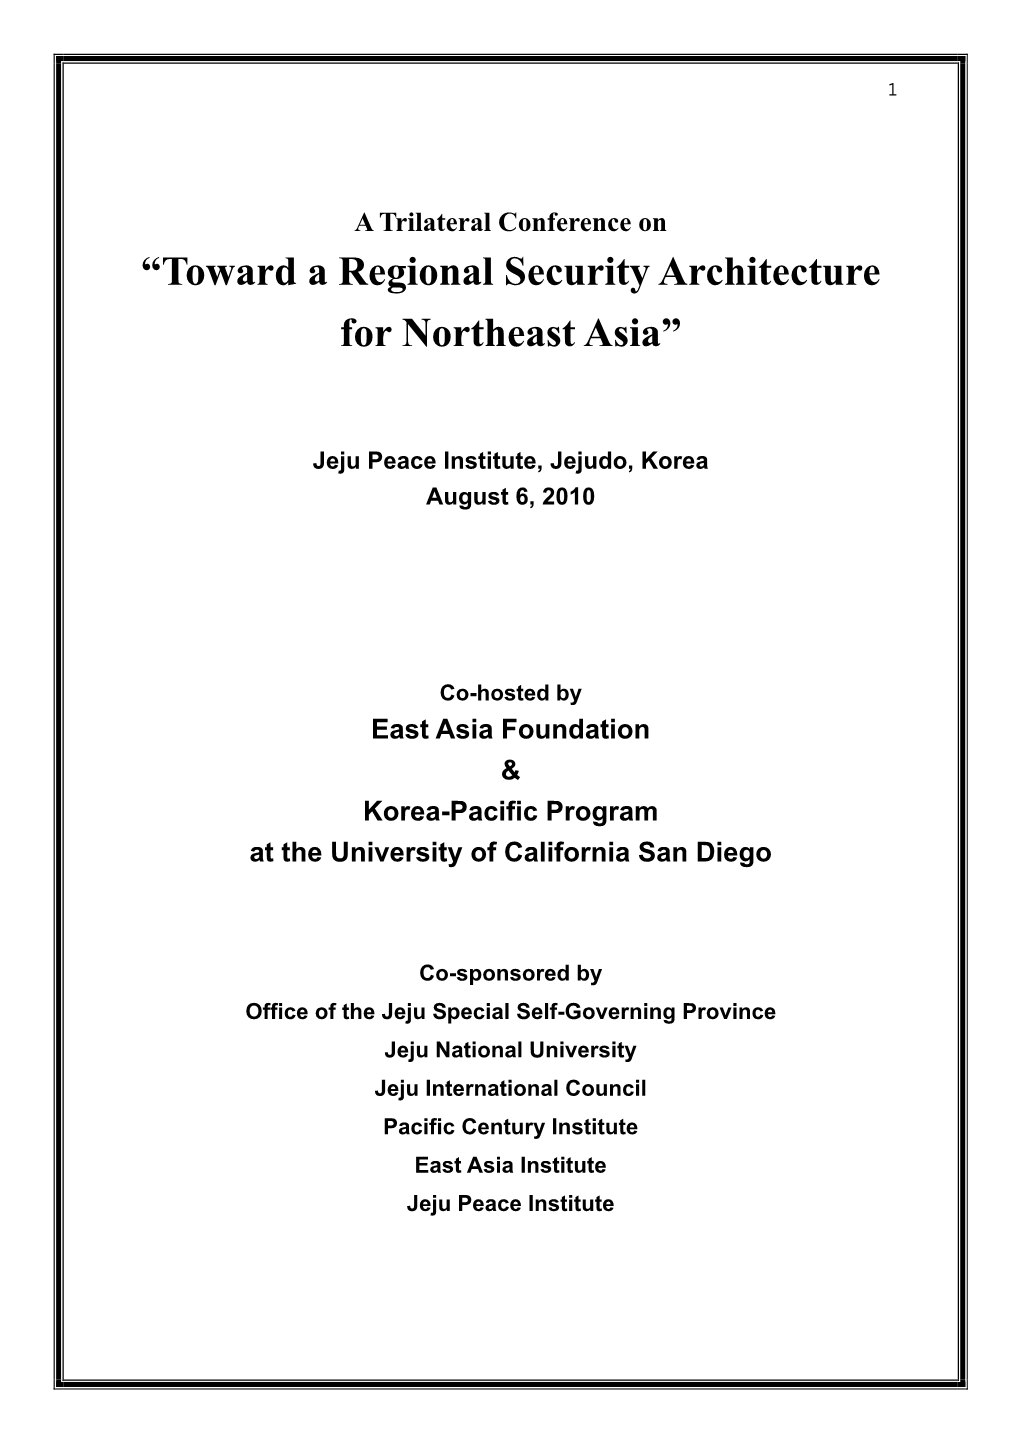 “Toward a Regional Security Architecture for Northeast Asia”